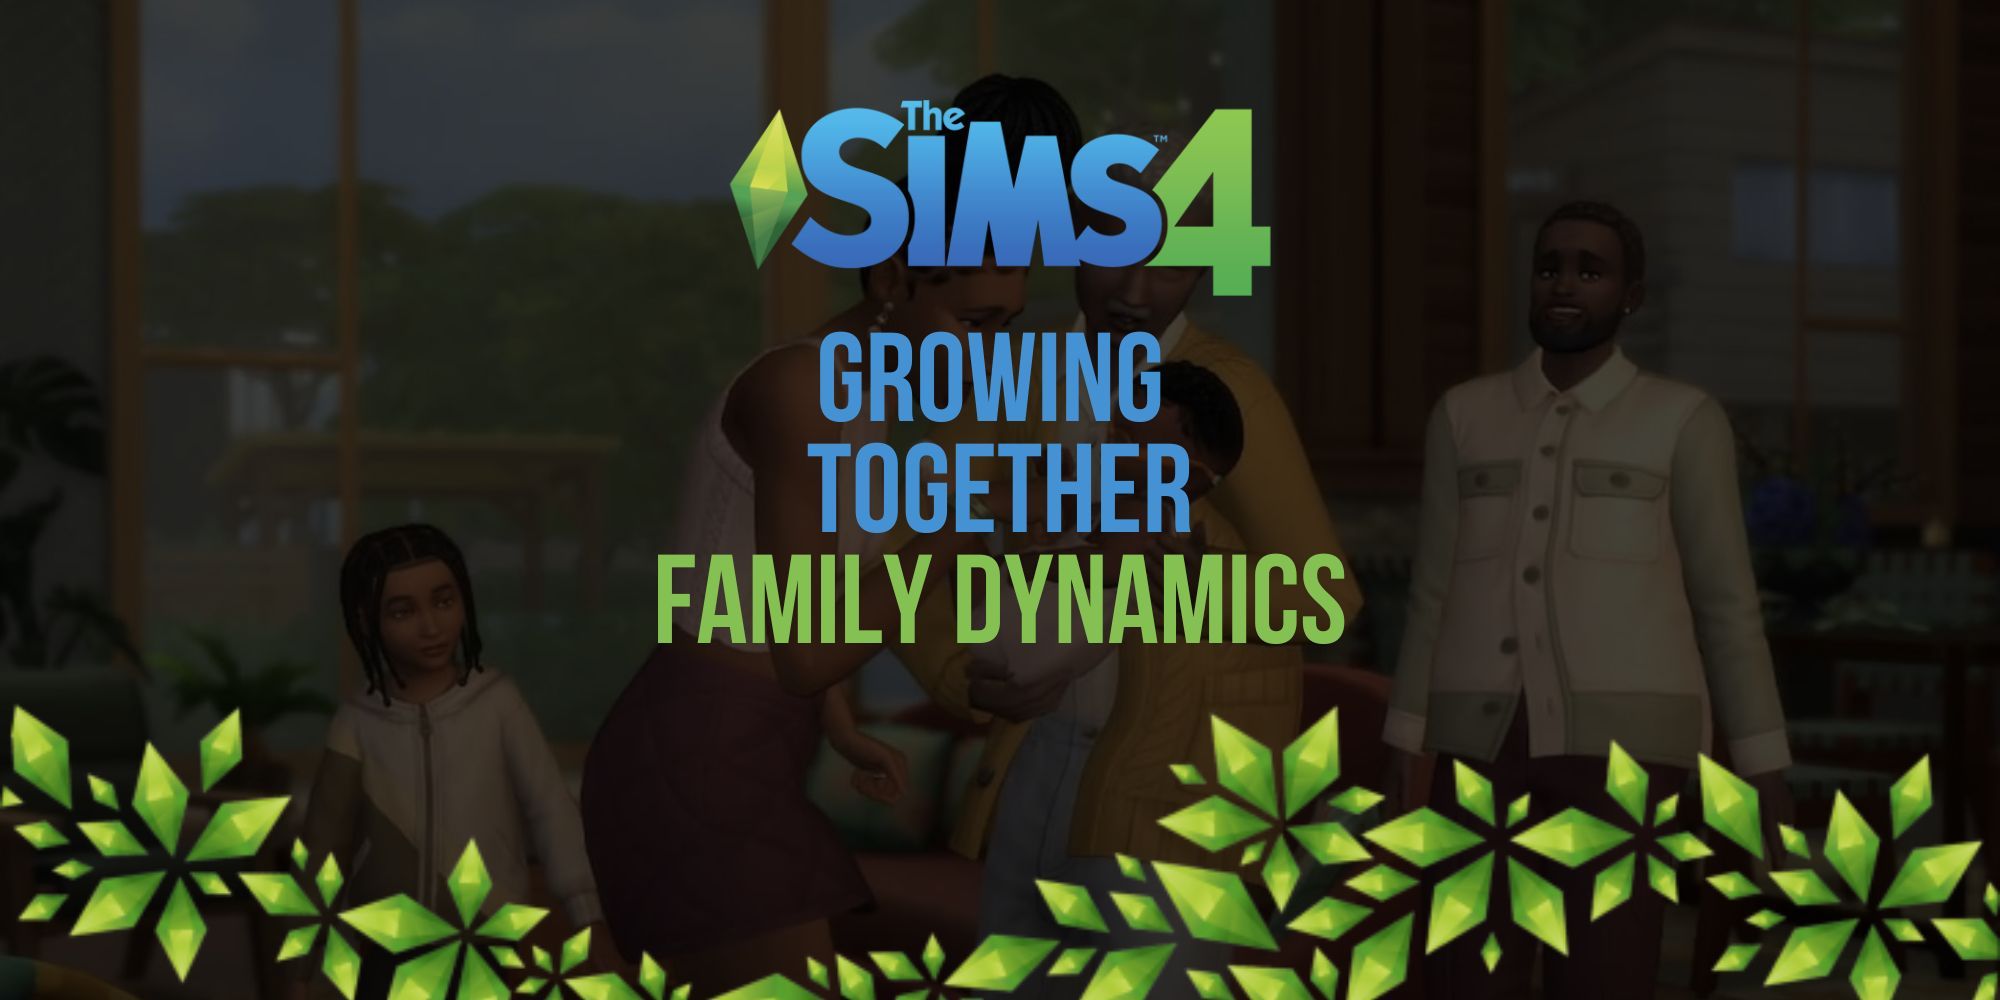 The Sims 4 Growing Together: Family Dynamics Guide